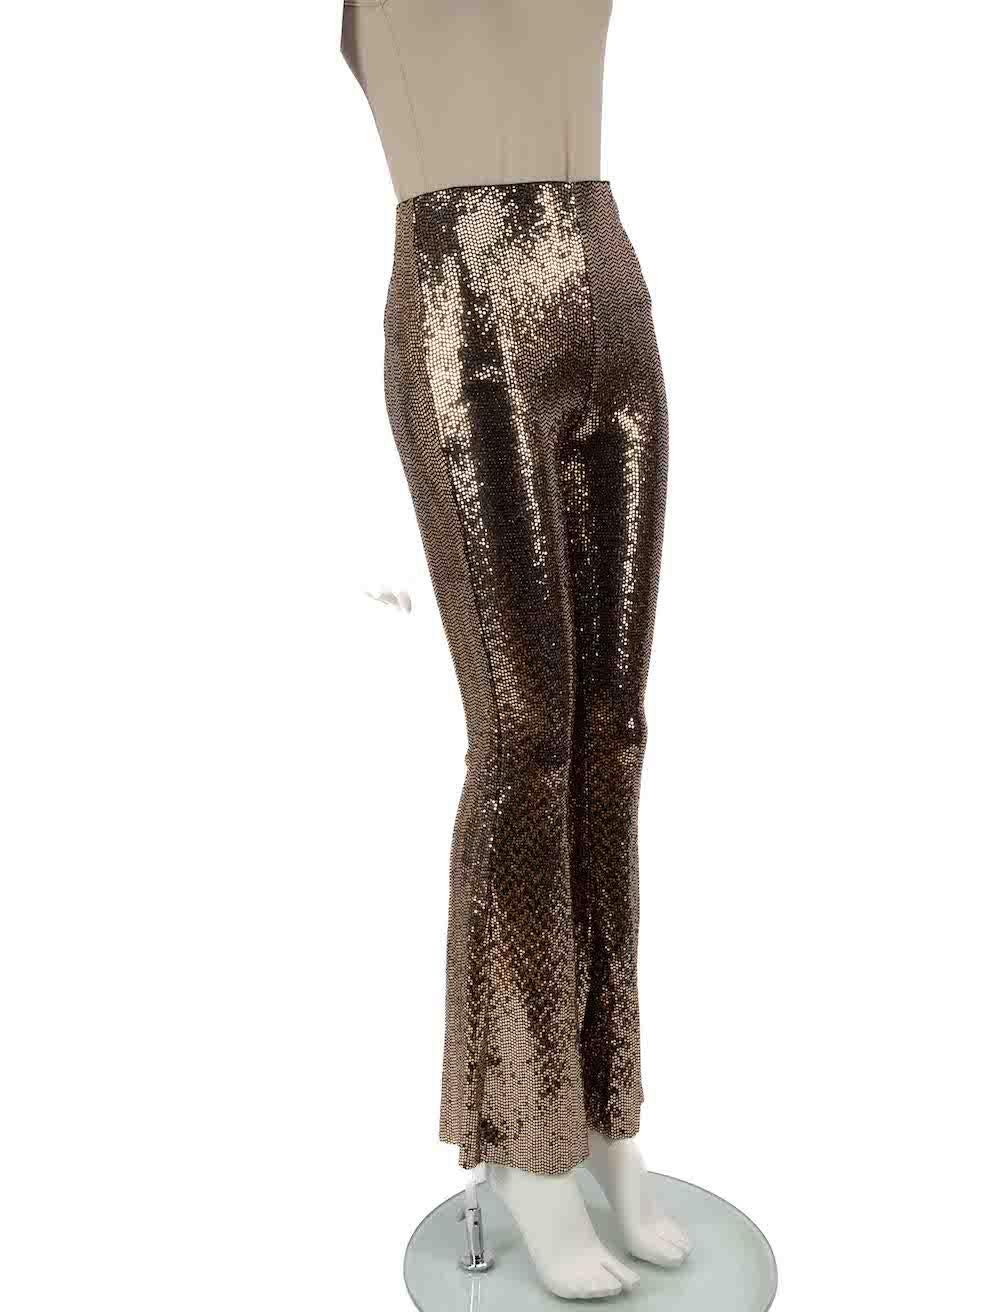 CONDITION is Very good. Minimal wear to trouser is evident. Minimal wear to sequins on waistband with some missing on this used Maje designer resale item.
 
 
 
 Details
 
 
 Gold
 
 Synthetic
 
 Trousers
 
 Sequin embellished
 
 Bootcut
 
 High